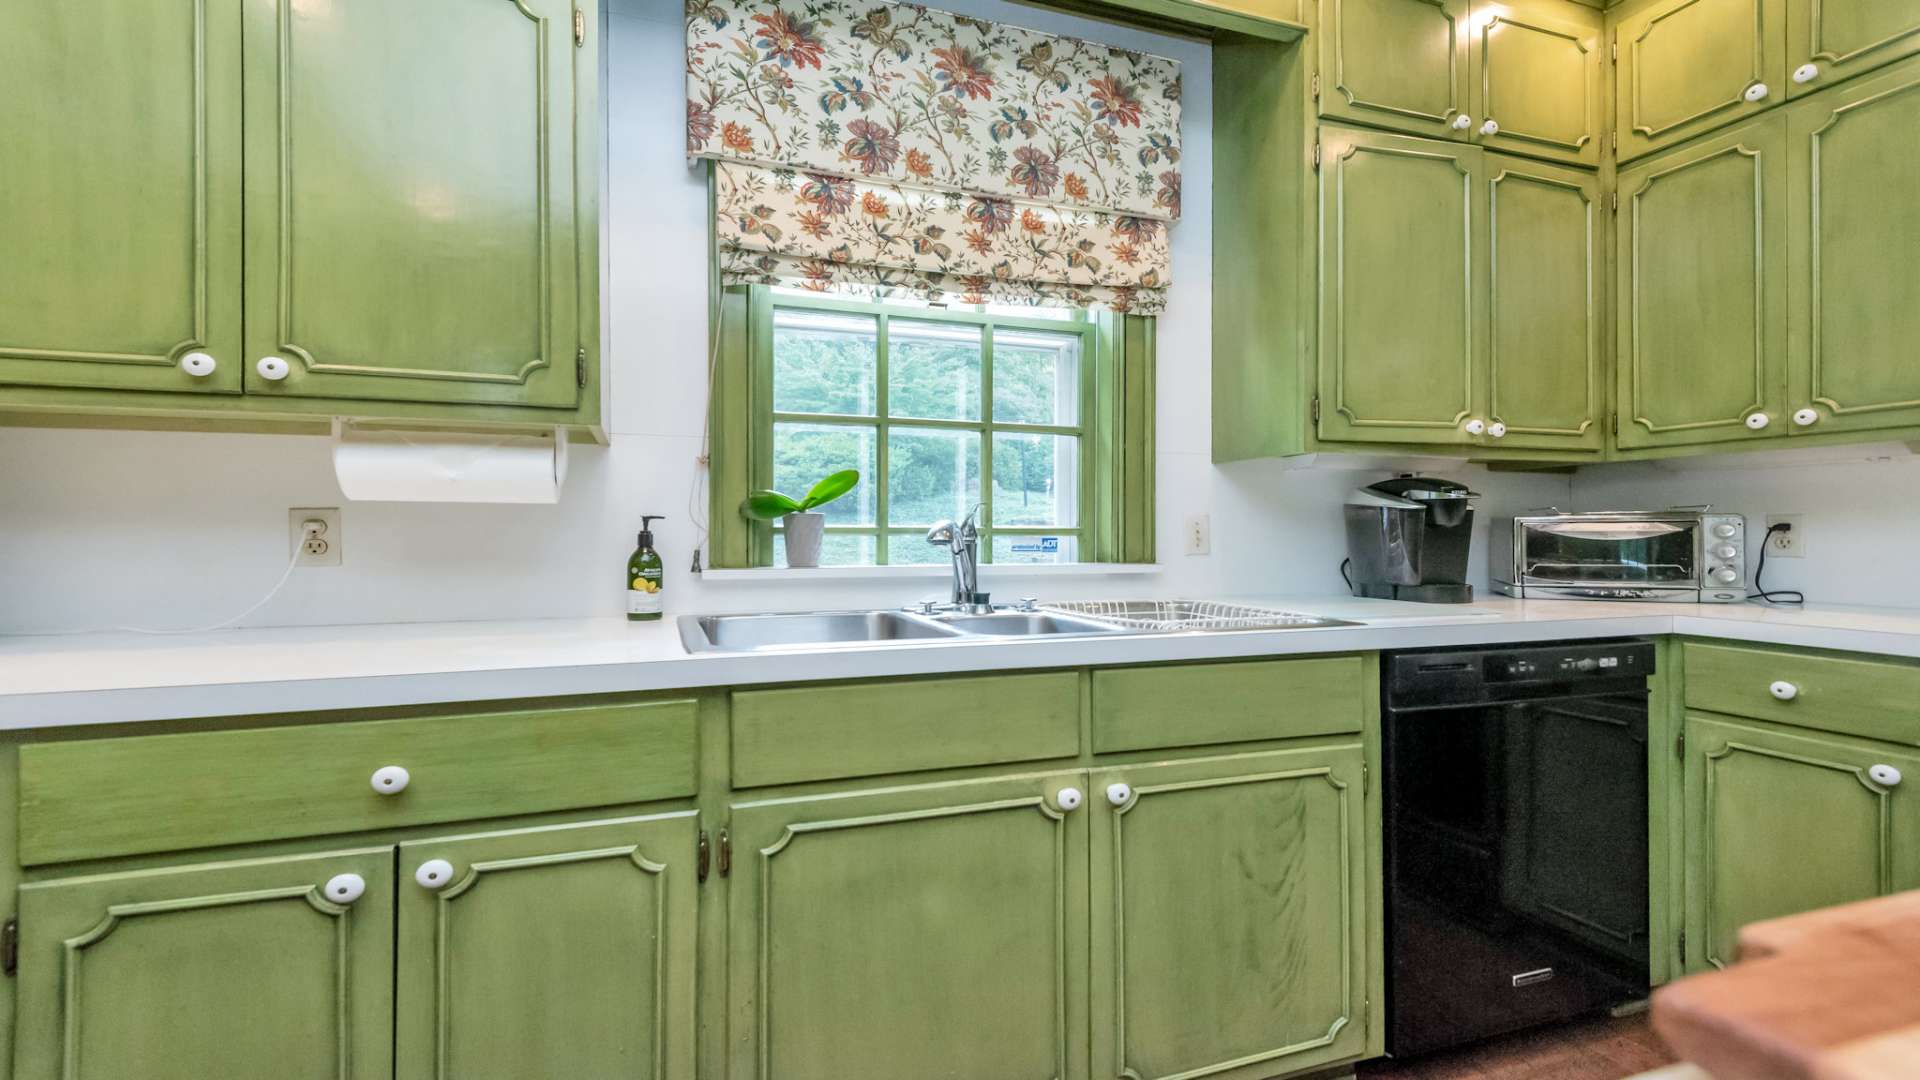 Handcrafted Custom cabinetry providing yet another tribute to the colonial era. Notice the tri-sink area that includes a prep sink.